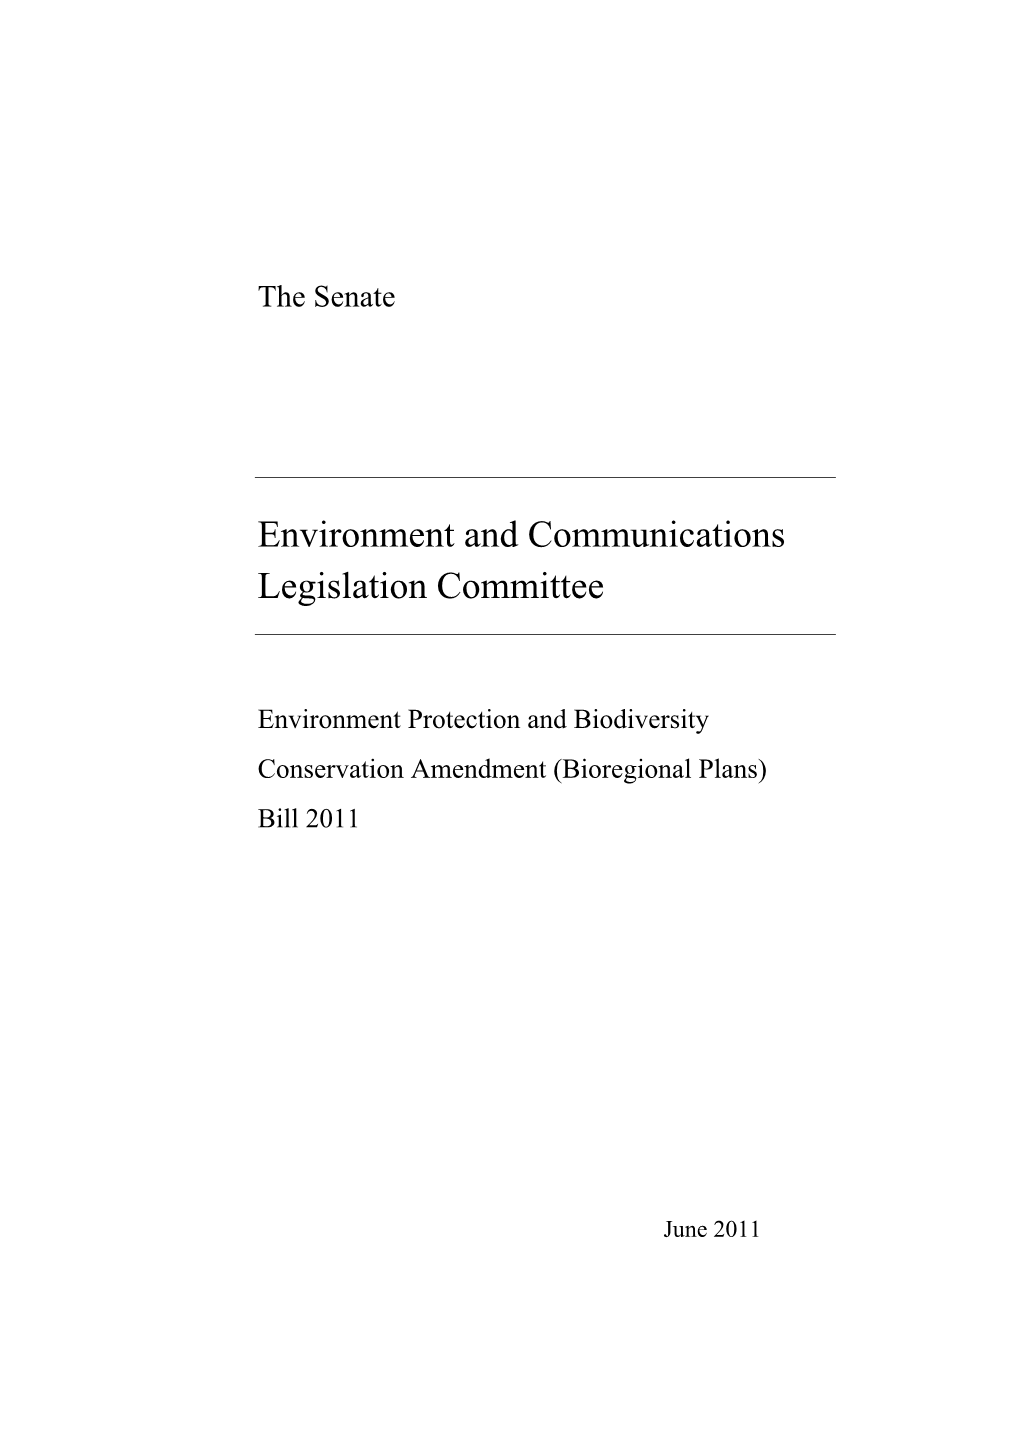 Report: Environment Protection and Biodiversity Conservation